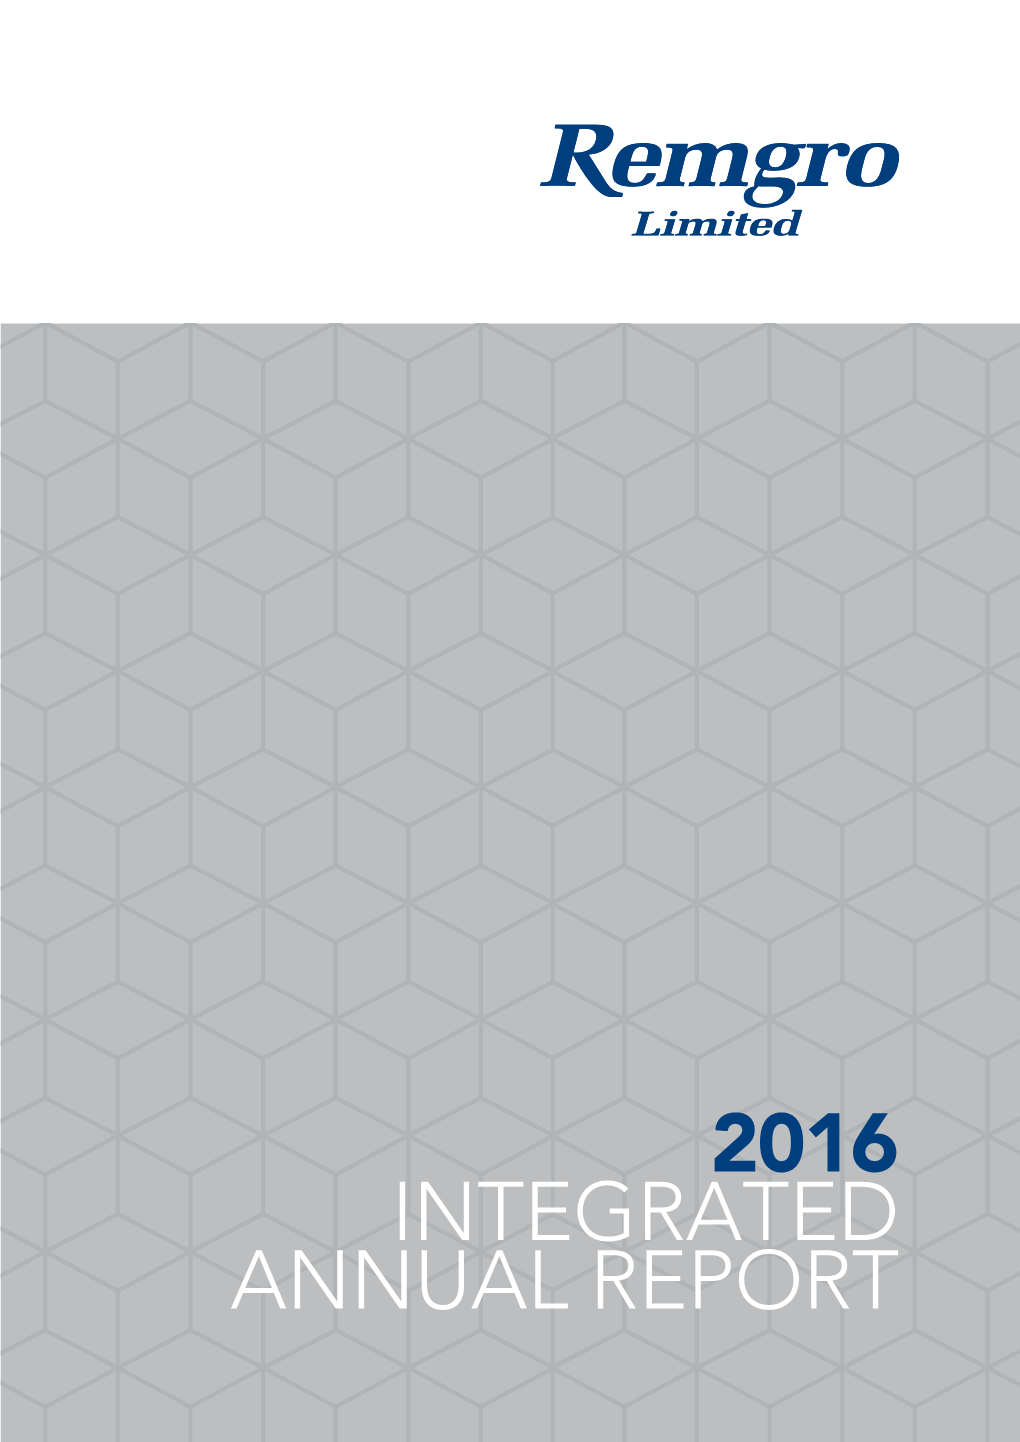 2016 Integrated Annual Report Creating Shareholder Value Since 1948